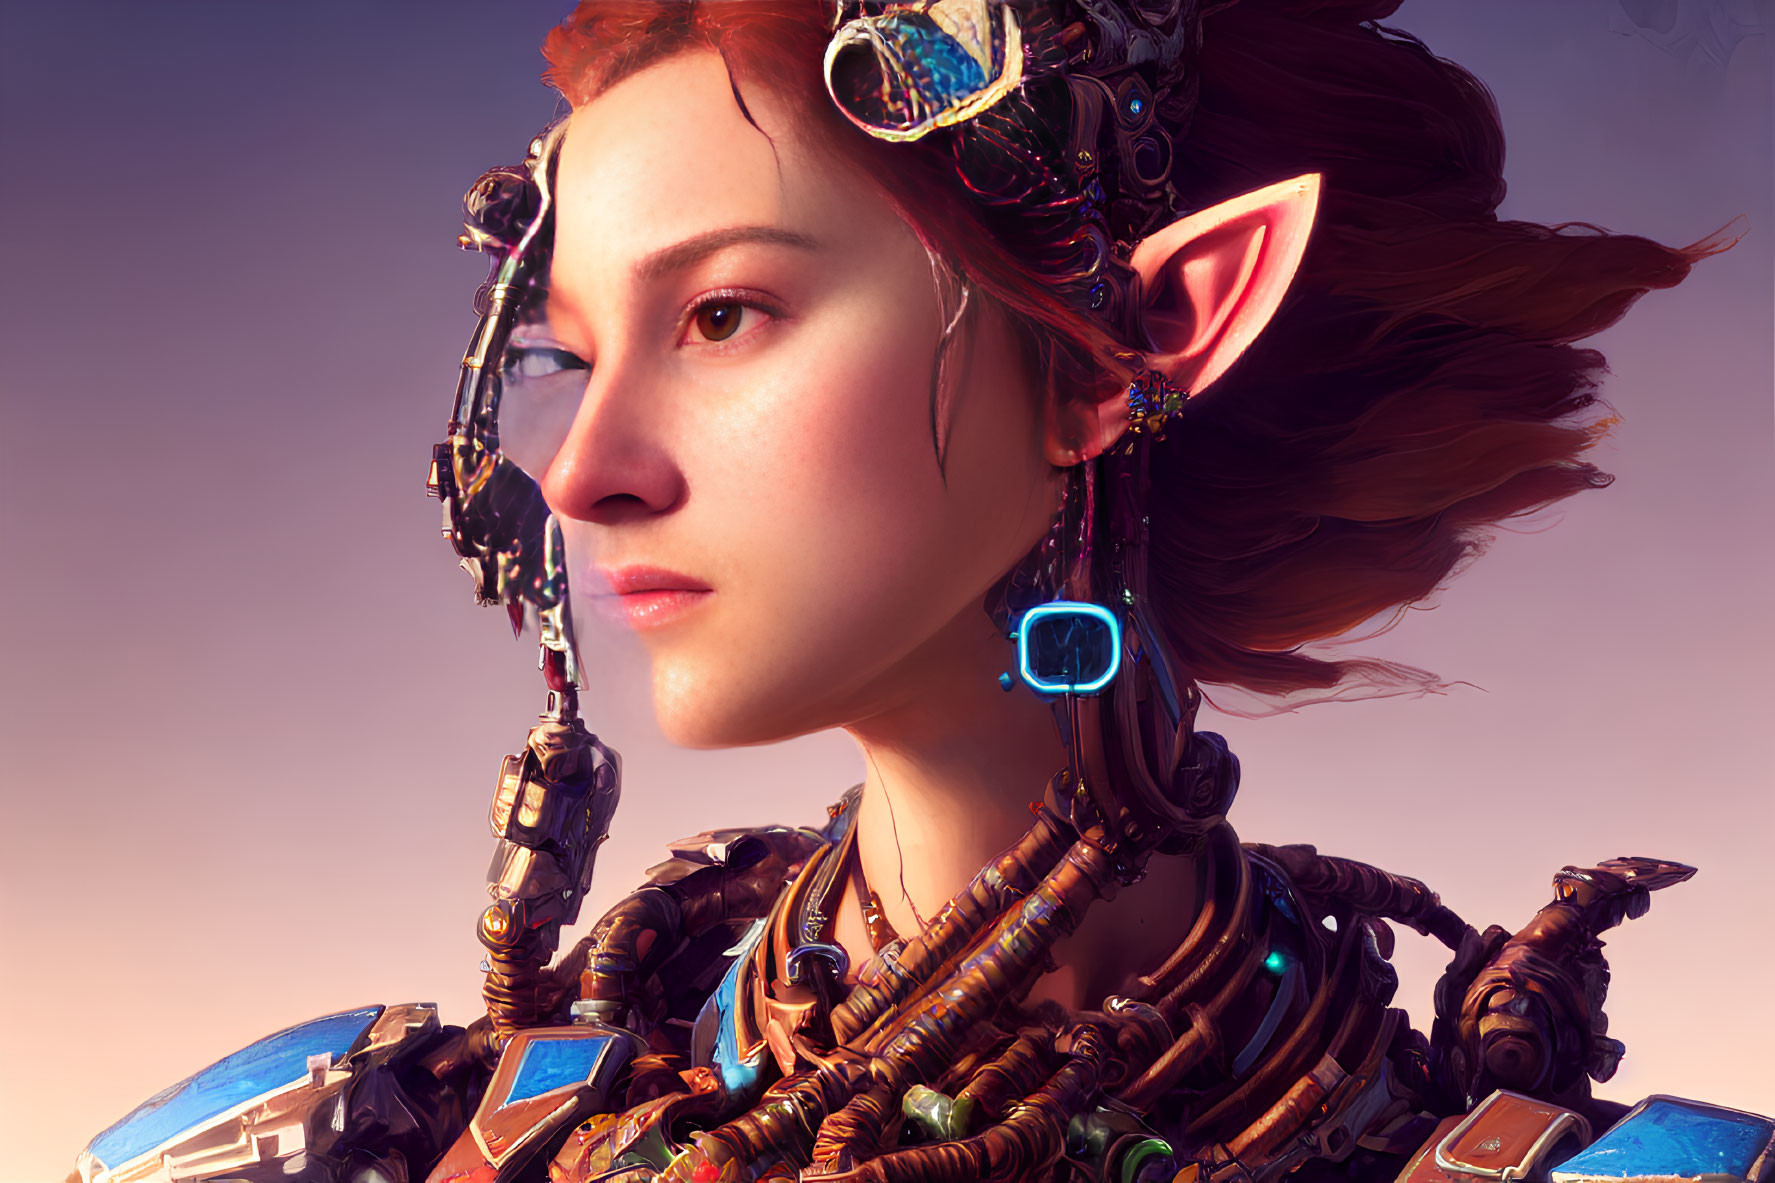 Red-haired female character with pointed ears and high-tech adornments on soft background